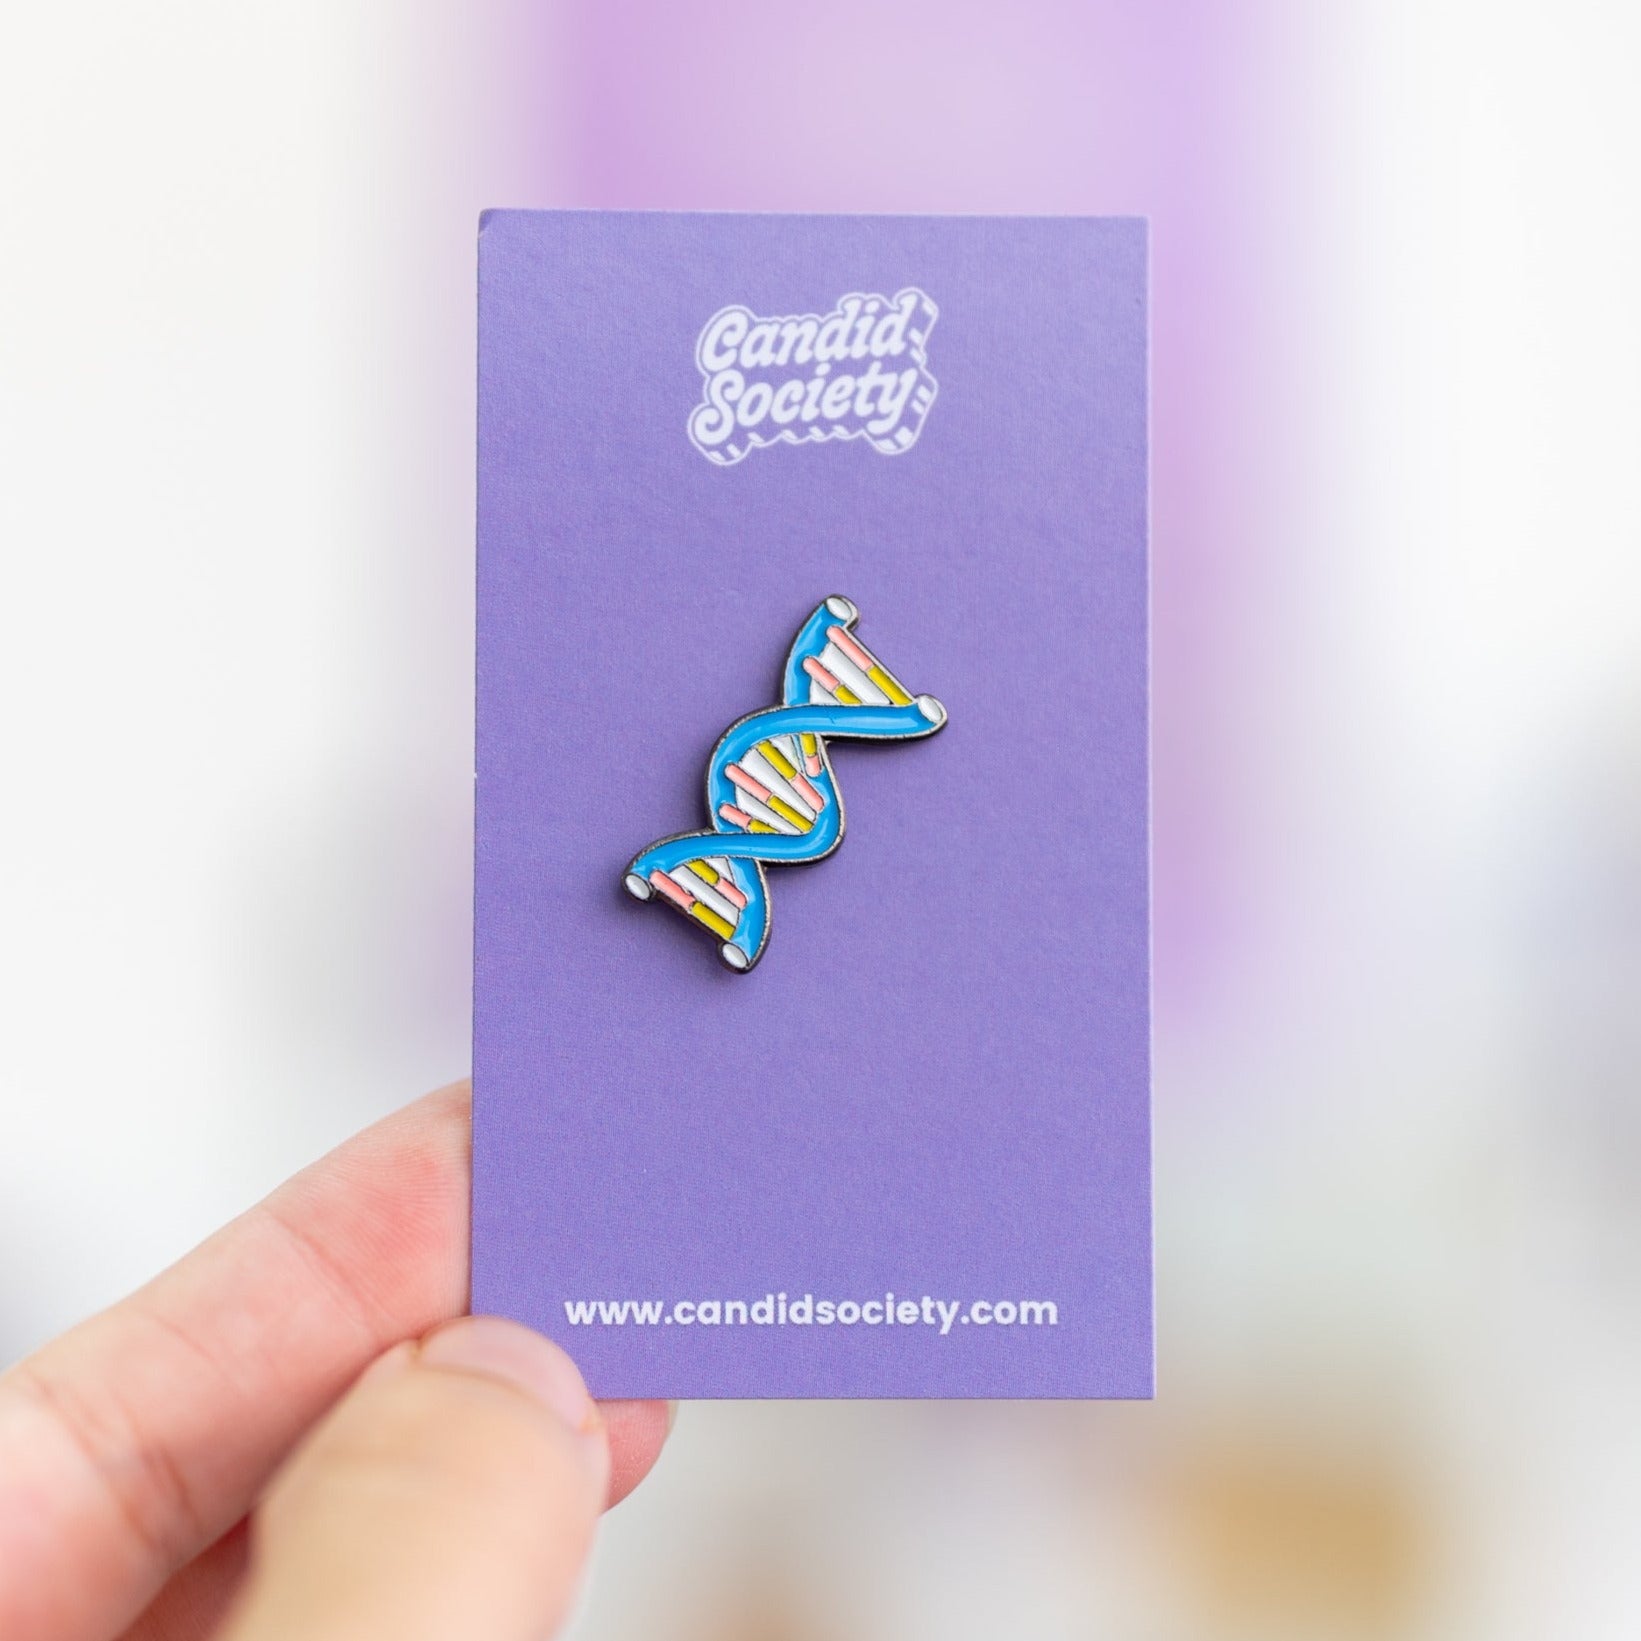 DNA Structure - Enamel Pin